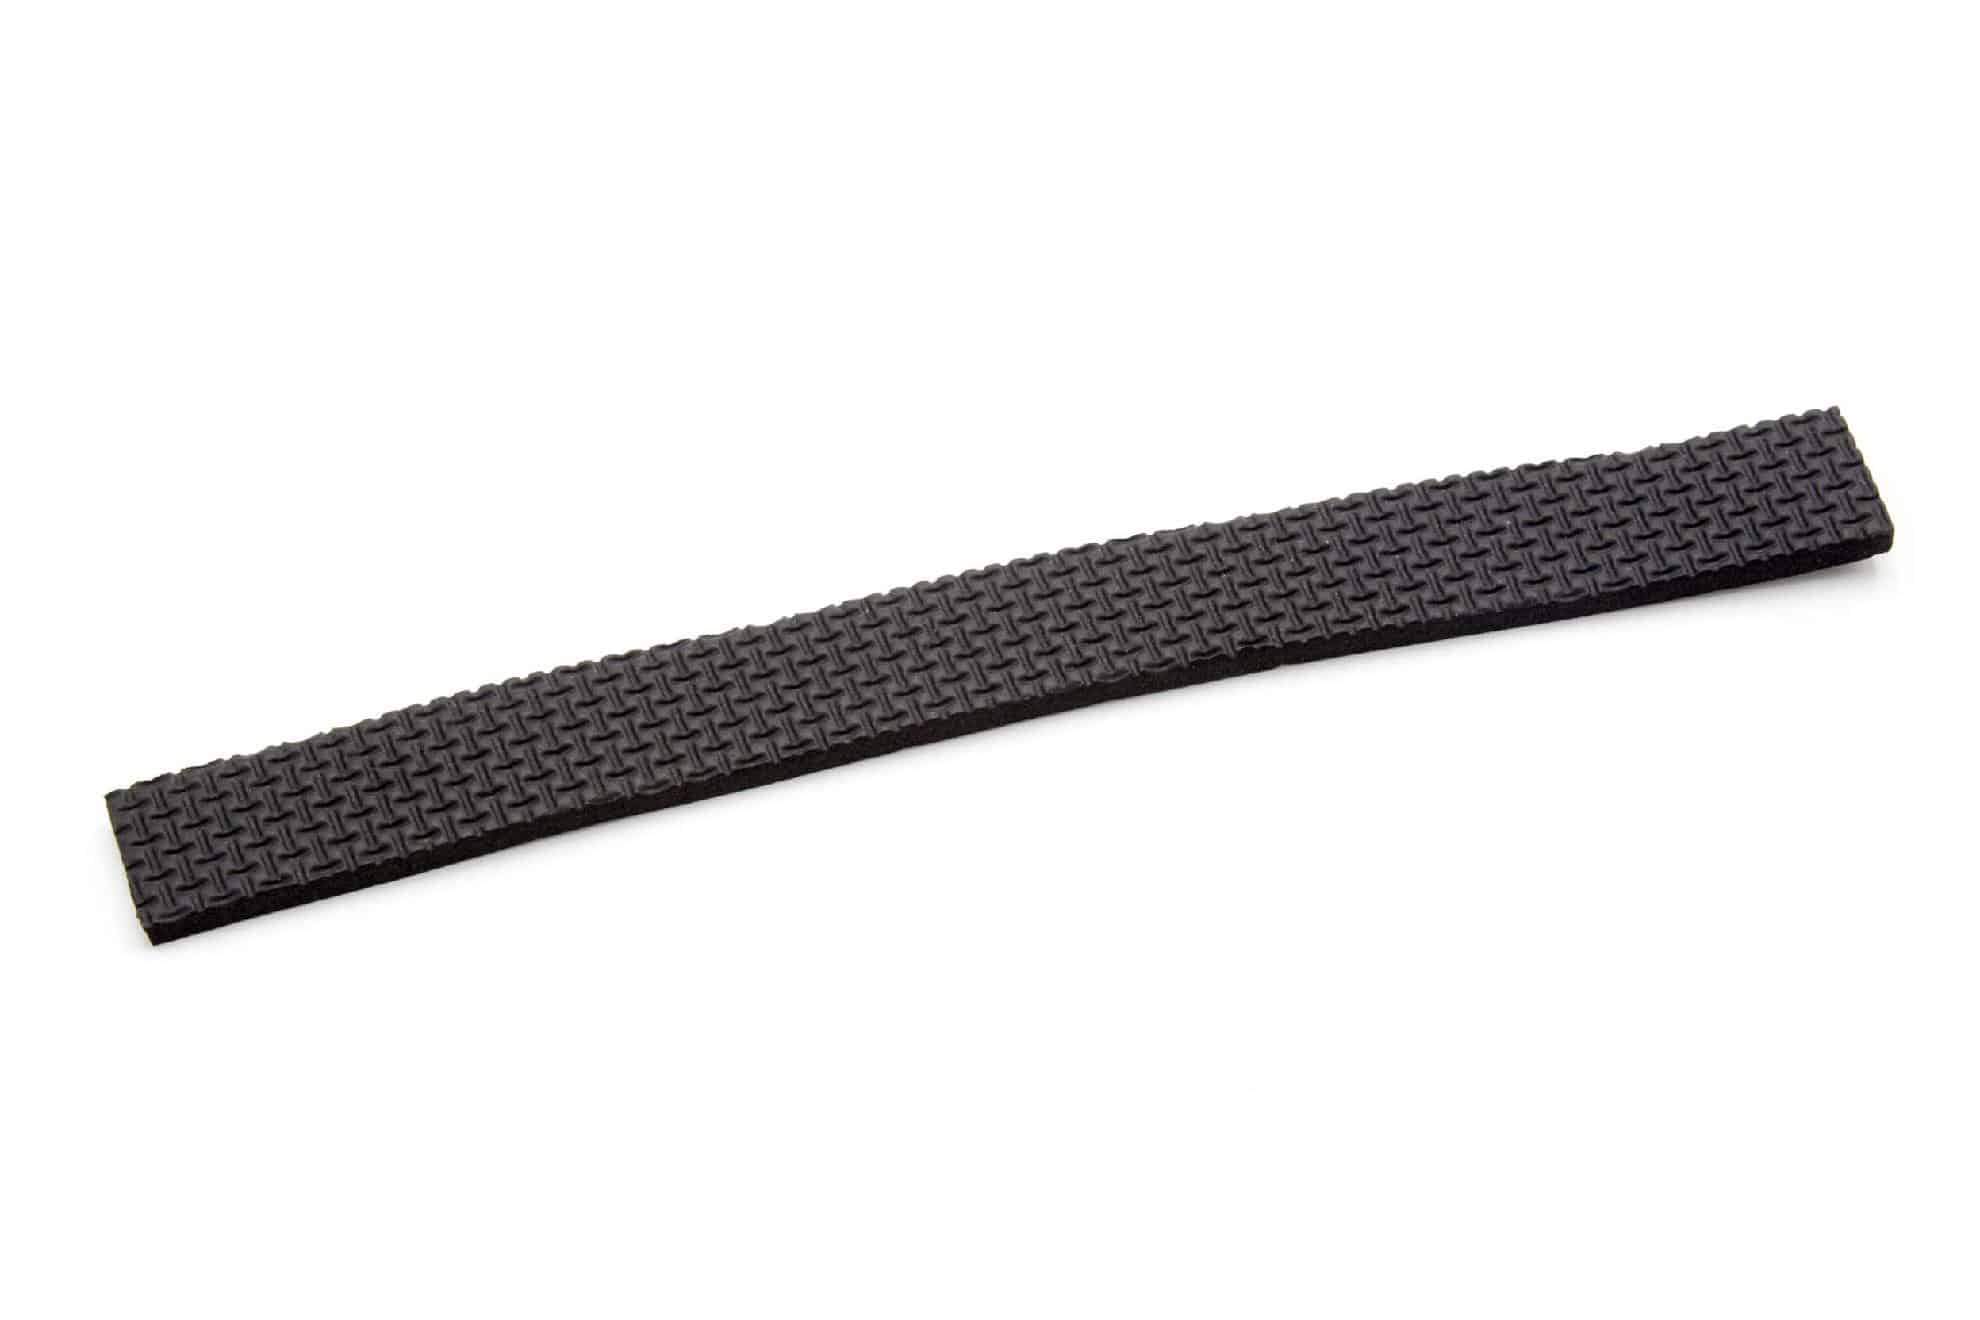 Tyre Profile for iRobot Scooba Robot Vacuum Cleaner and Mop etc. - Rubber Profile Strip